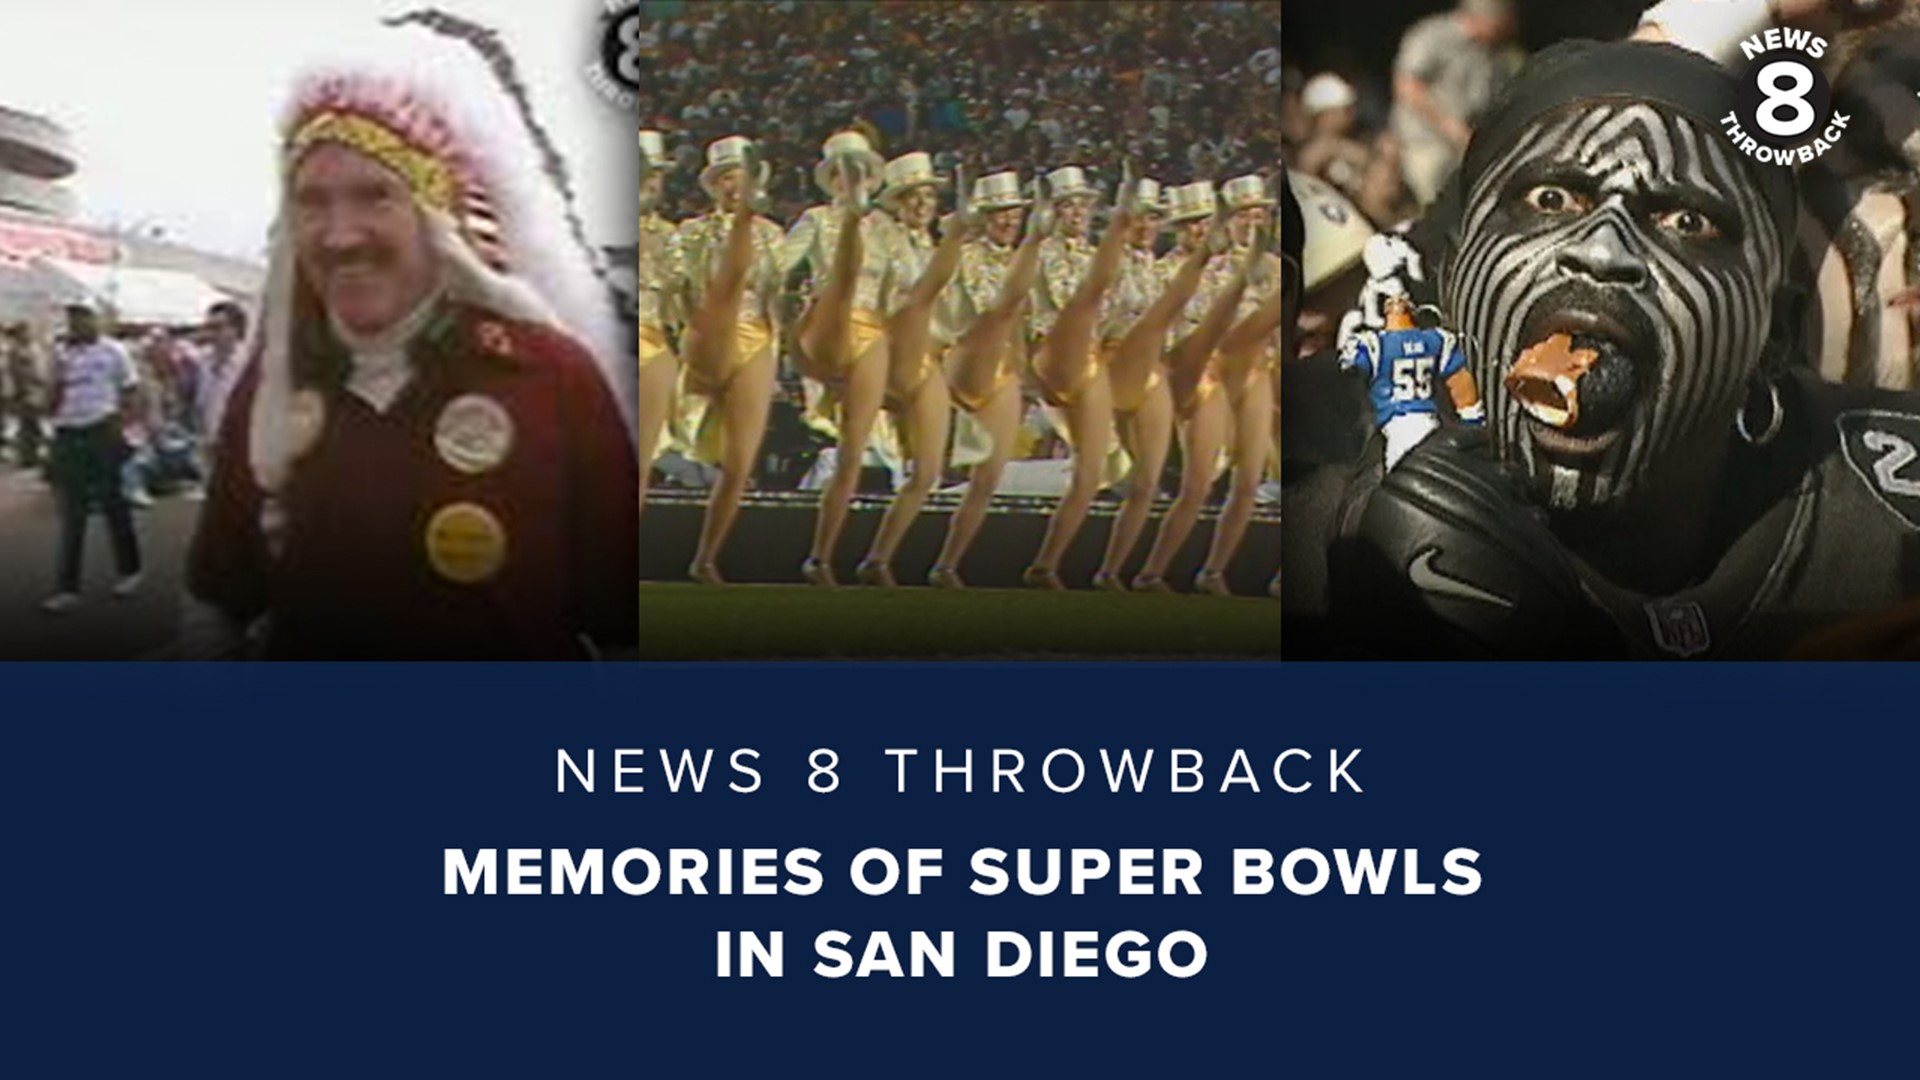 In this News 8 Throwback, we're taking you back to a few times when San Diego hosted the Super Bowl.